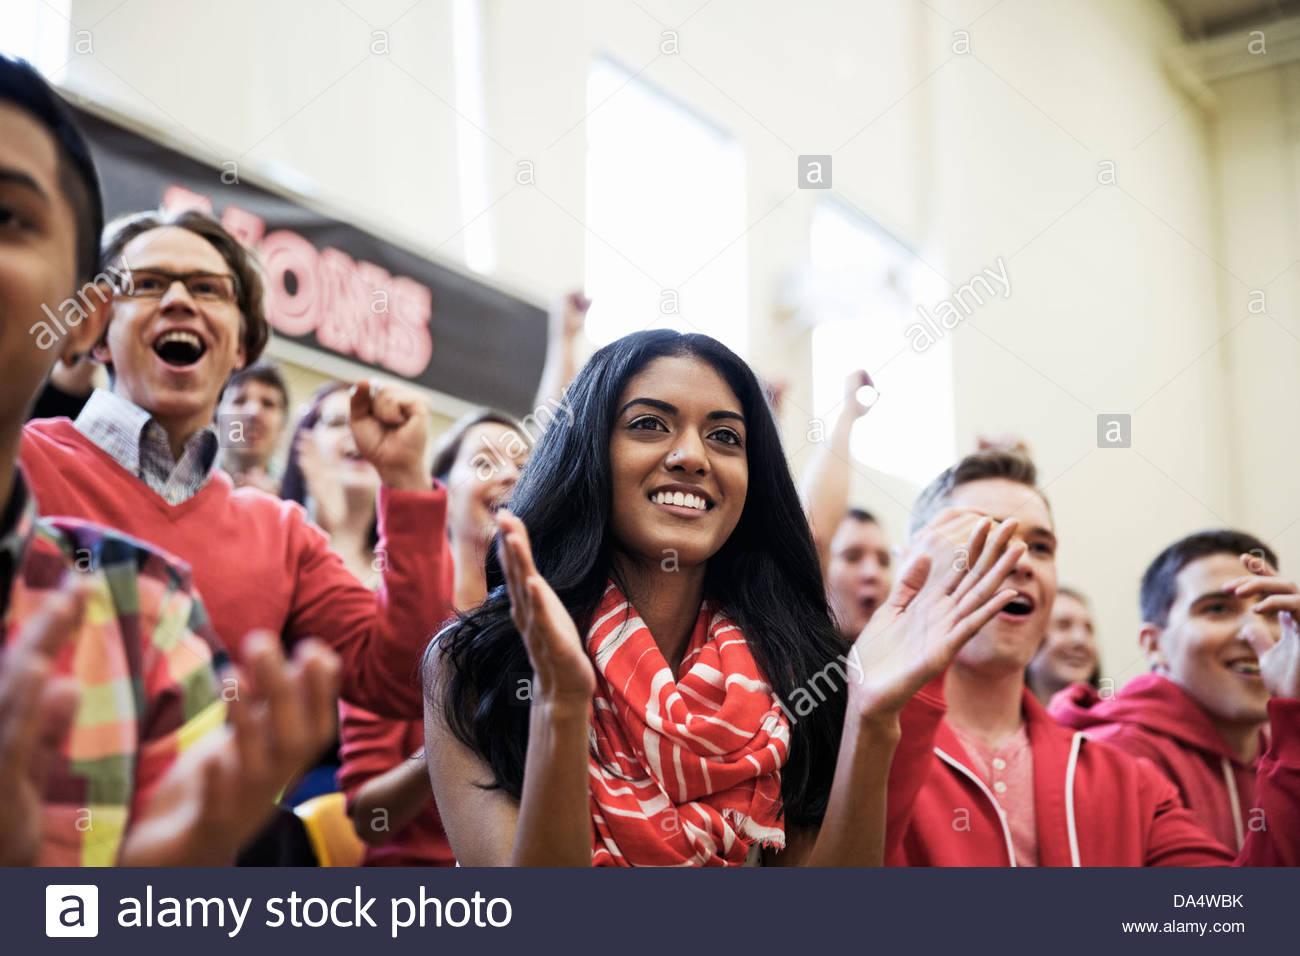 Large group of students cheering at college sporting event Stock Photo